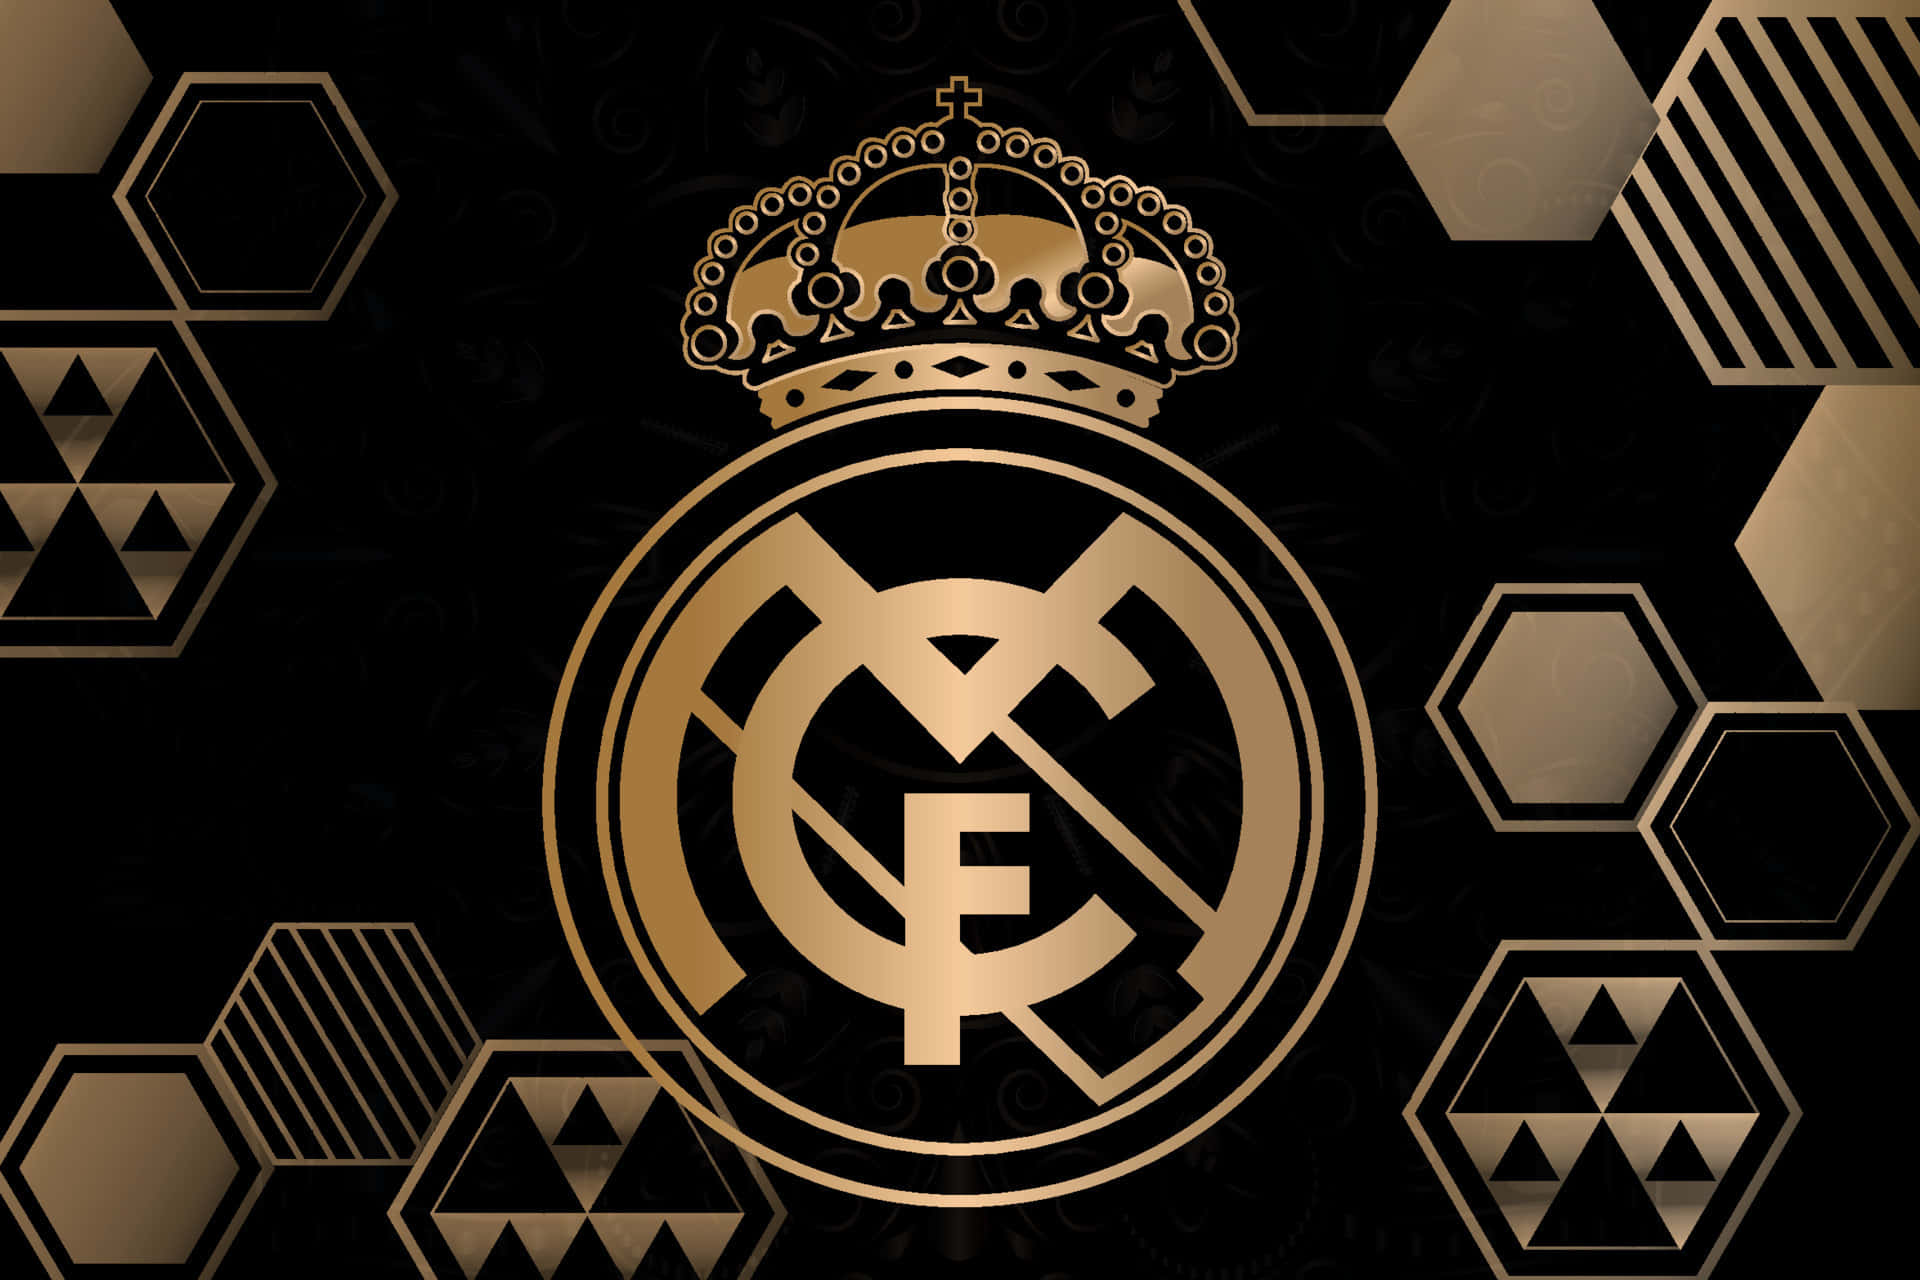 Real Madrid – The Winningest Club in Soccer